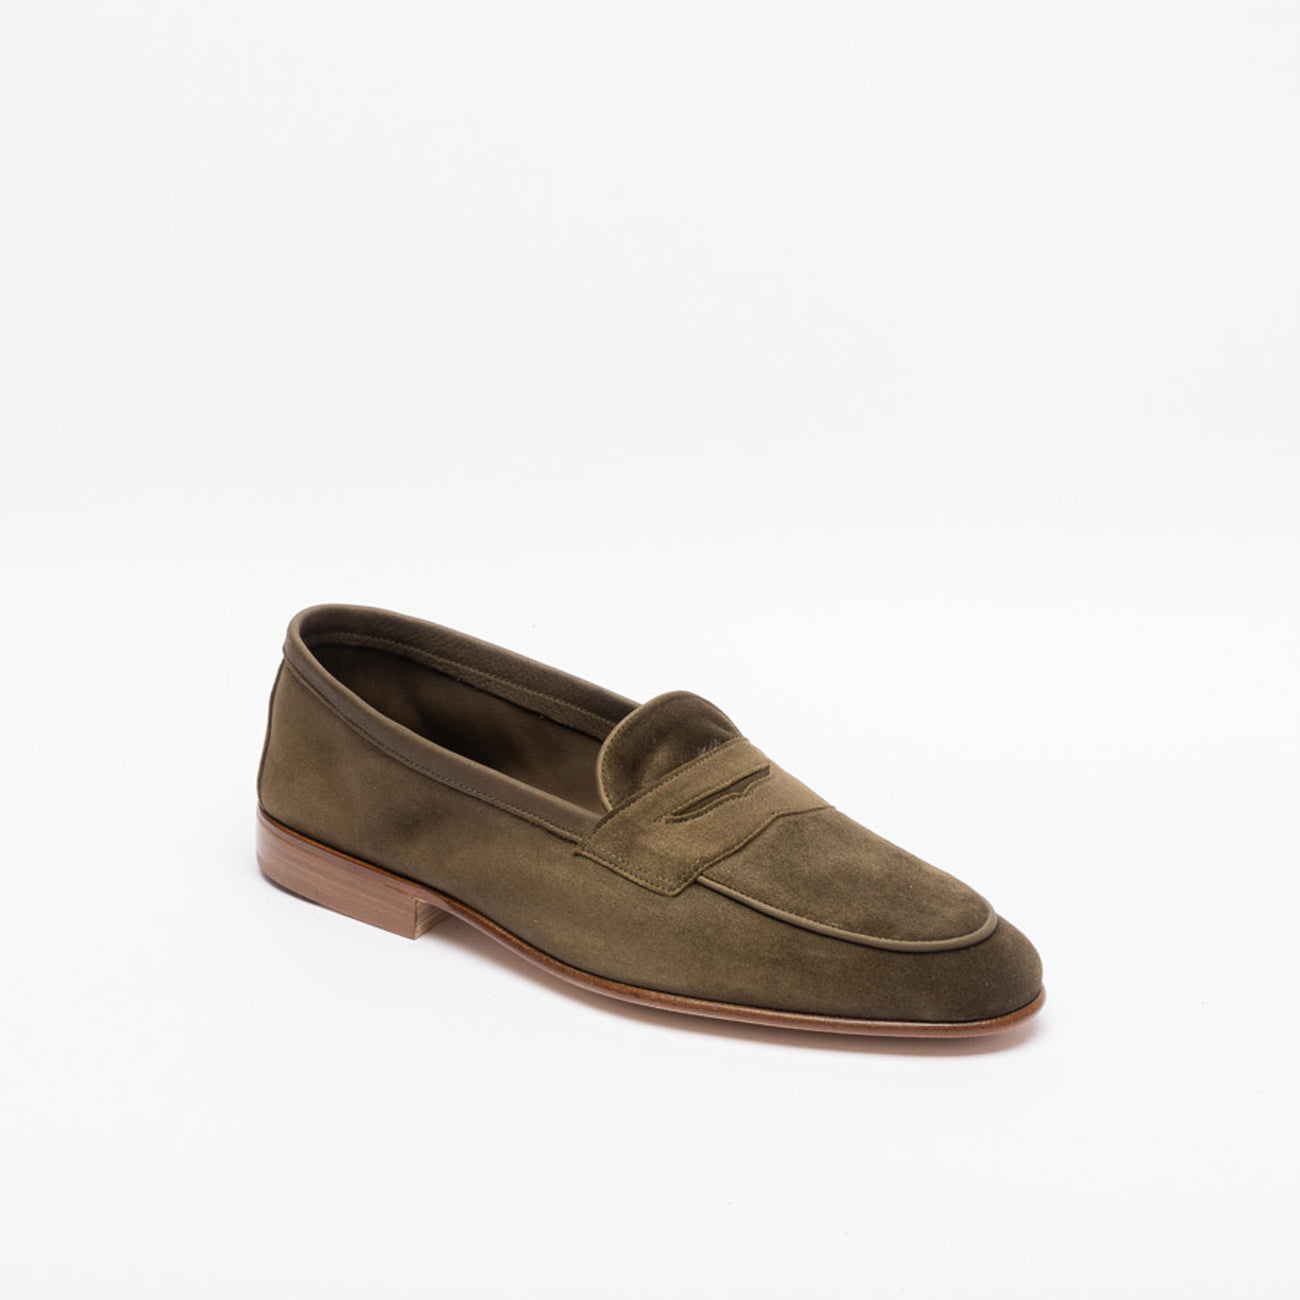 Edward Green Polperro unlined tassels loafer, military calf suede